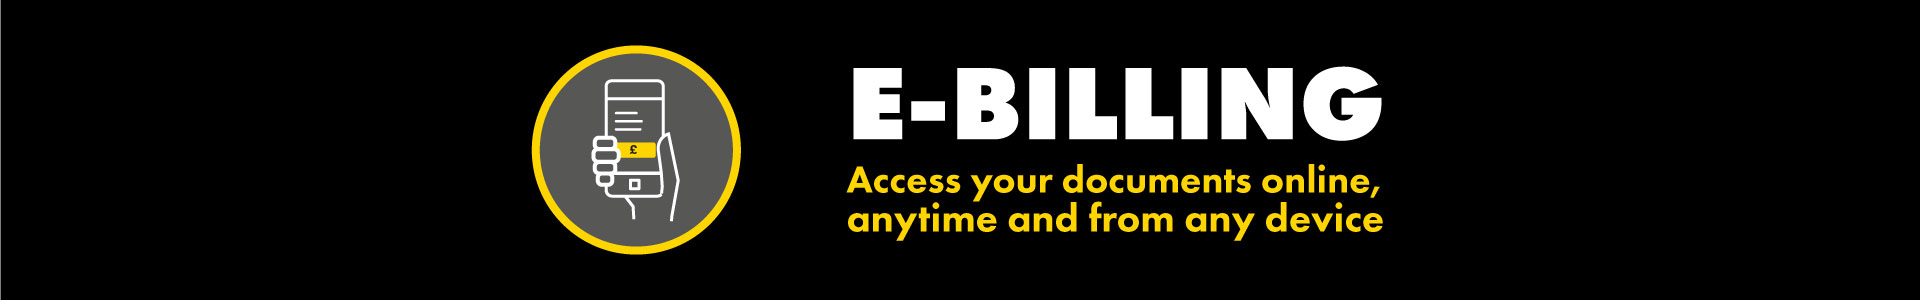 Find out more about e-billing